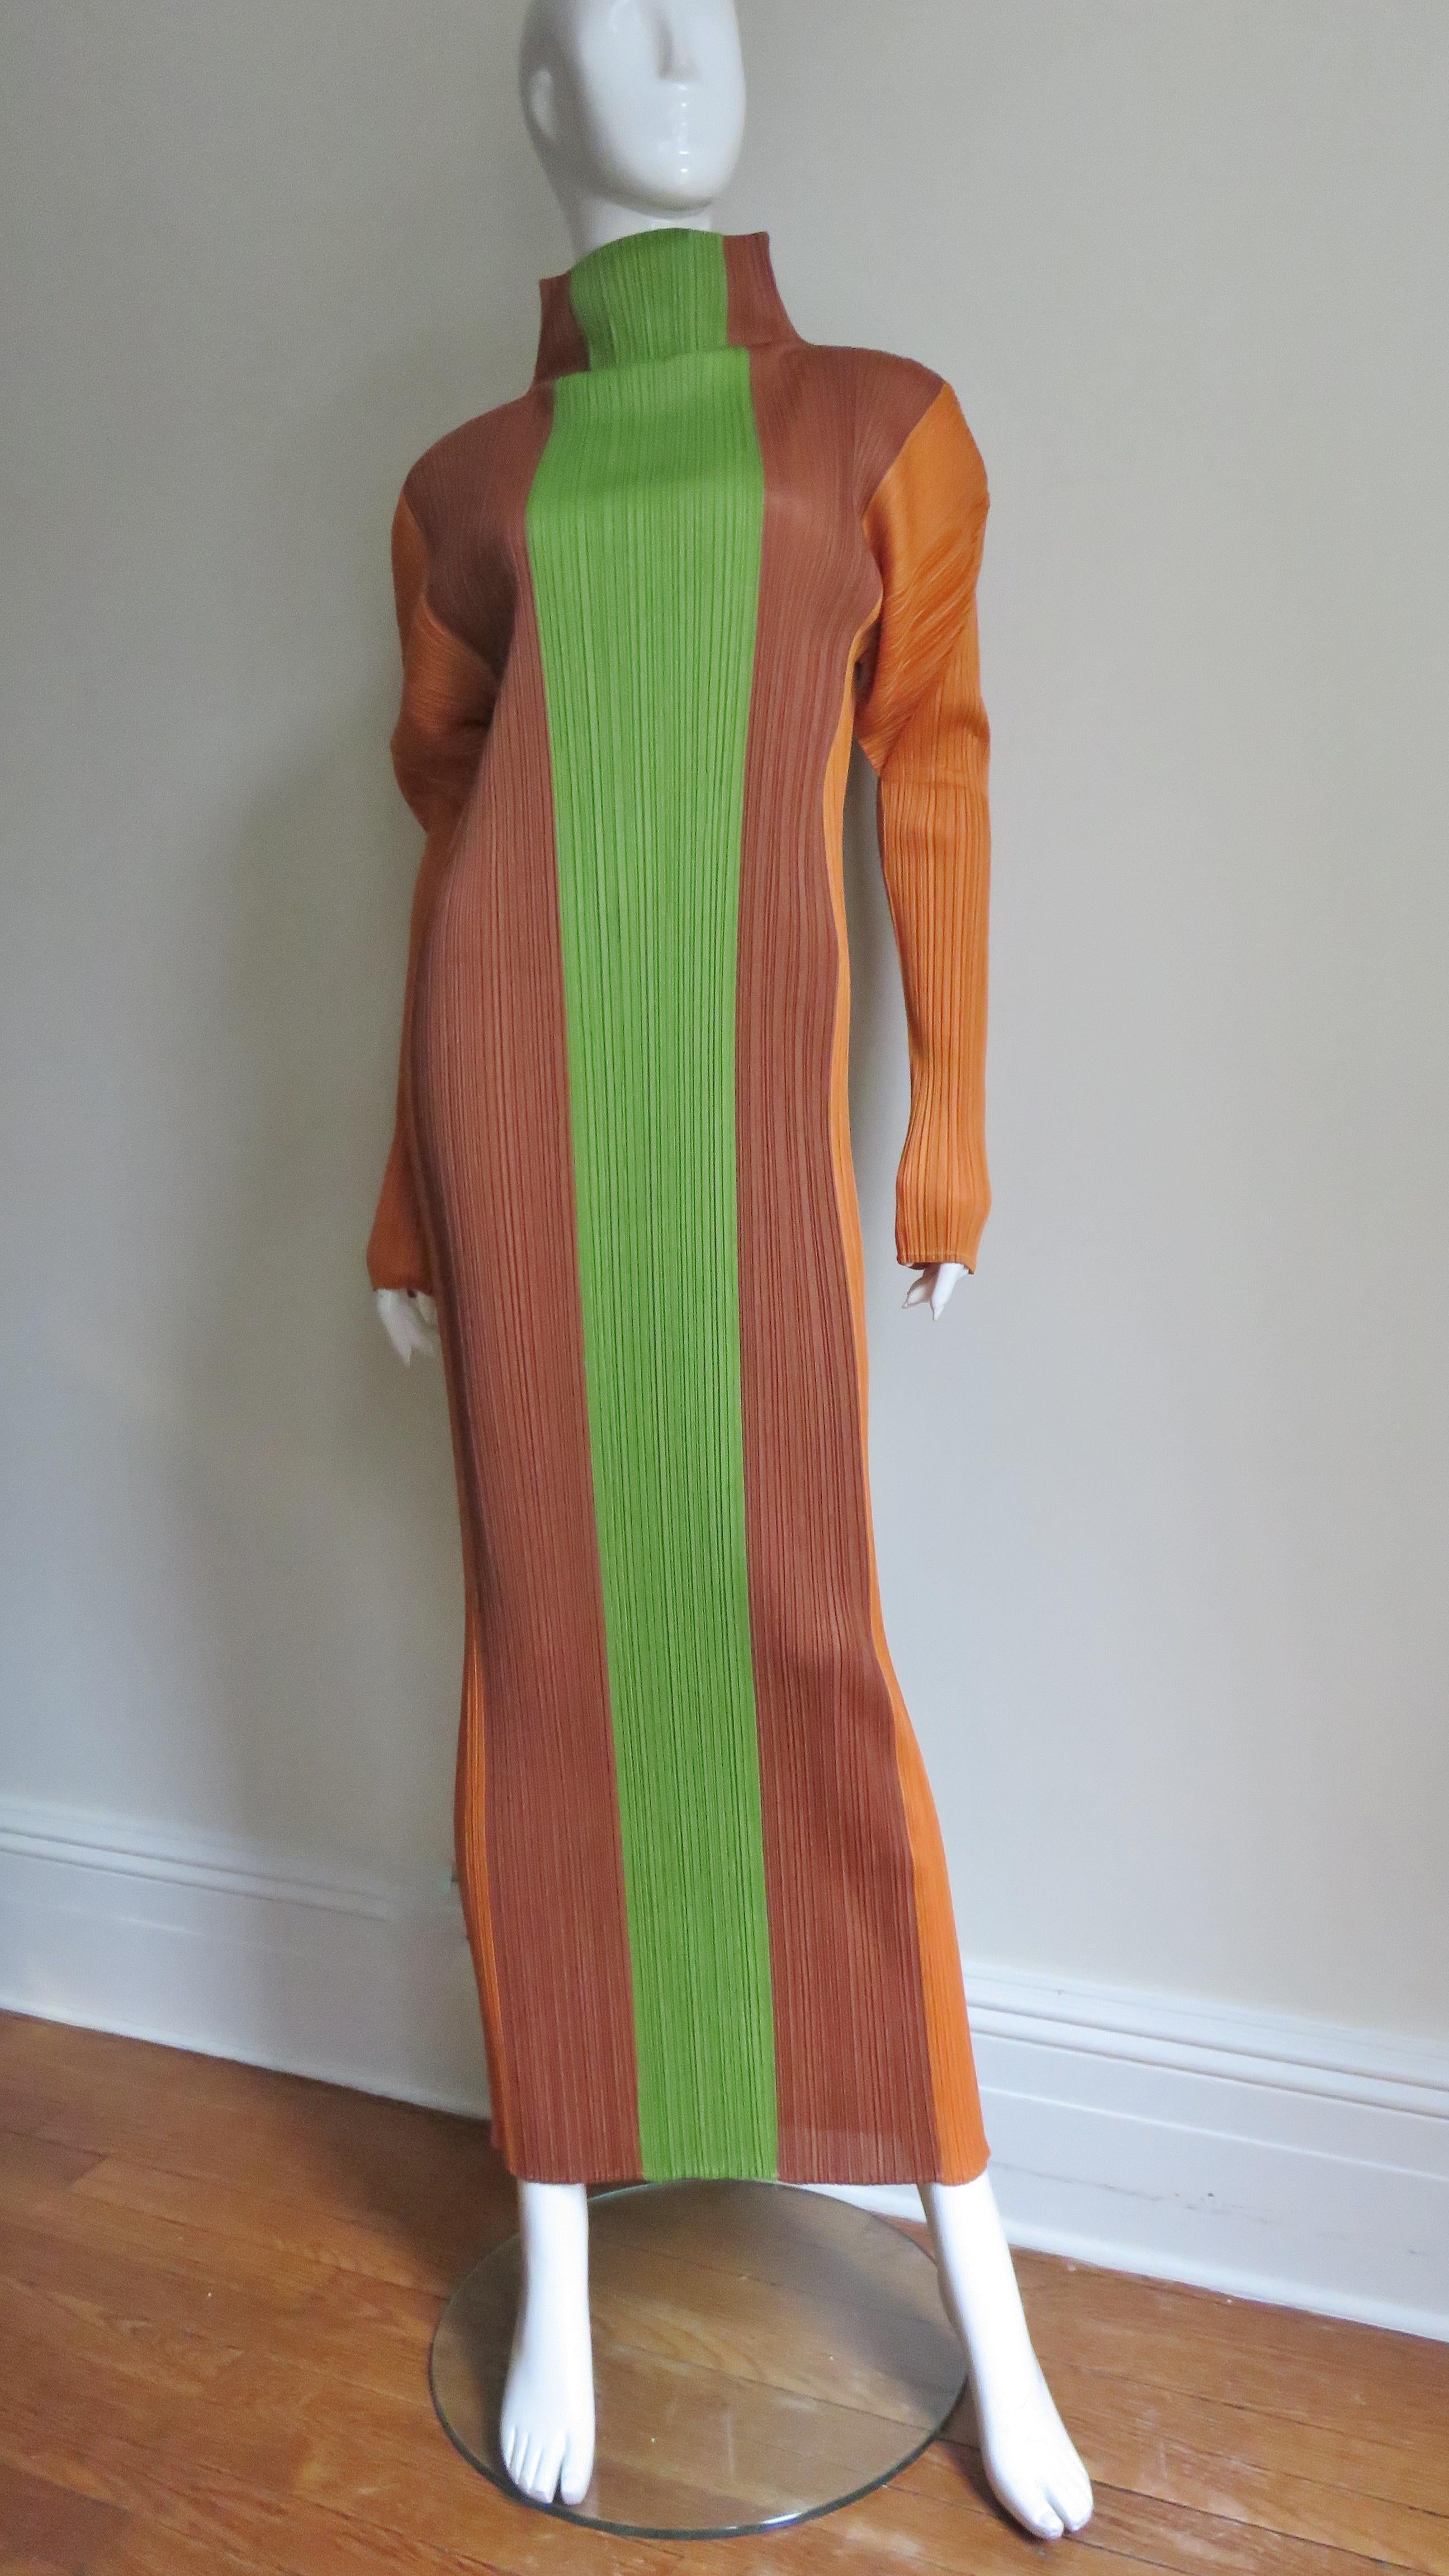 A beautiful color block signature micro pleated maxi dress from Issey Miyake in vertical panels of green, chocolate brown and orange. It has a stand up collar, long sleeves and slips on over the head. The fabric pleating conforms to the